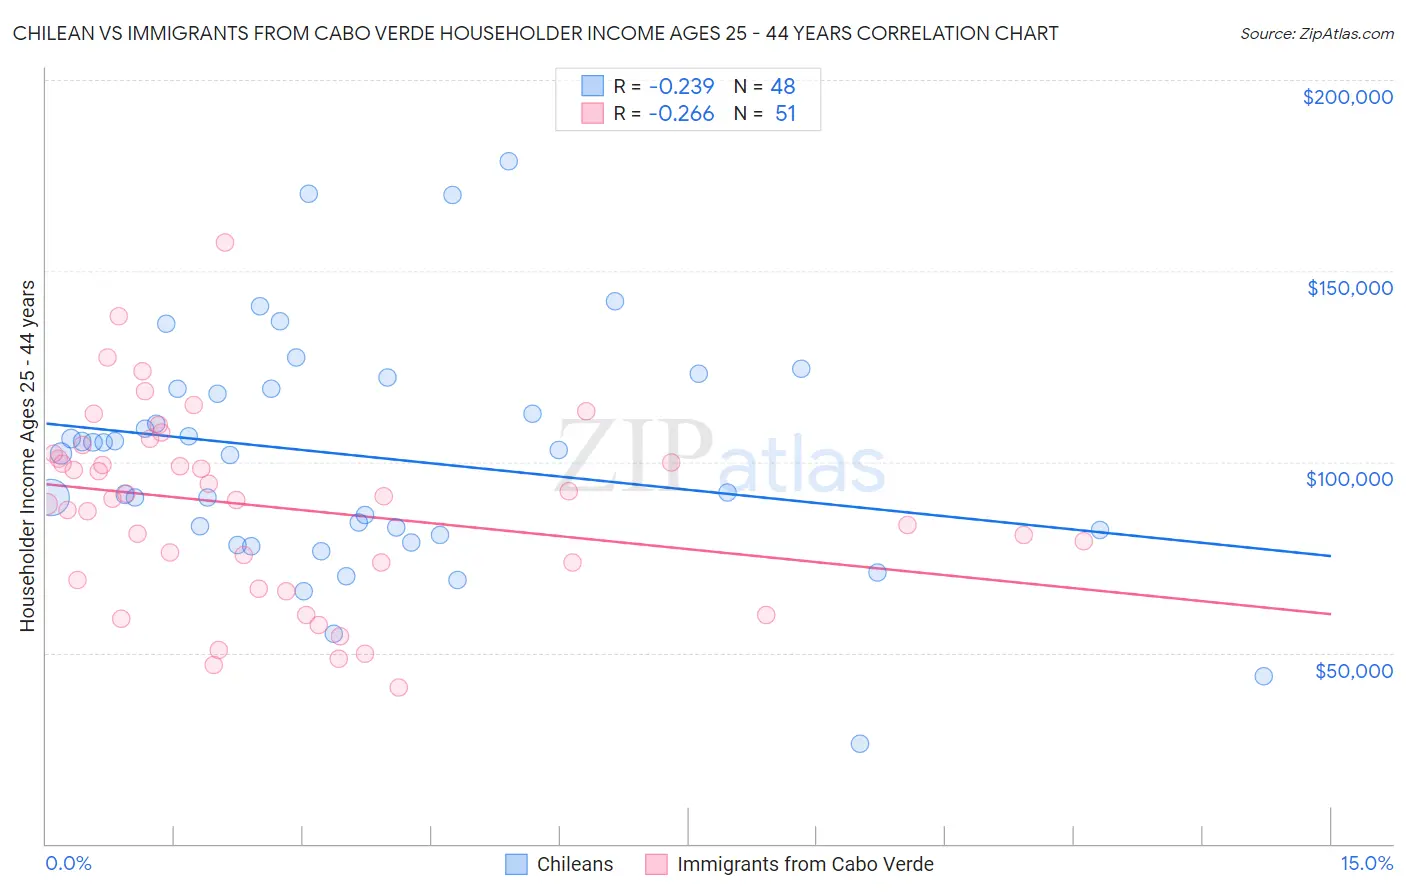 Chilean vs Immigrants from Cabo Verde Householder Income Ages 25 - 44 years